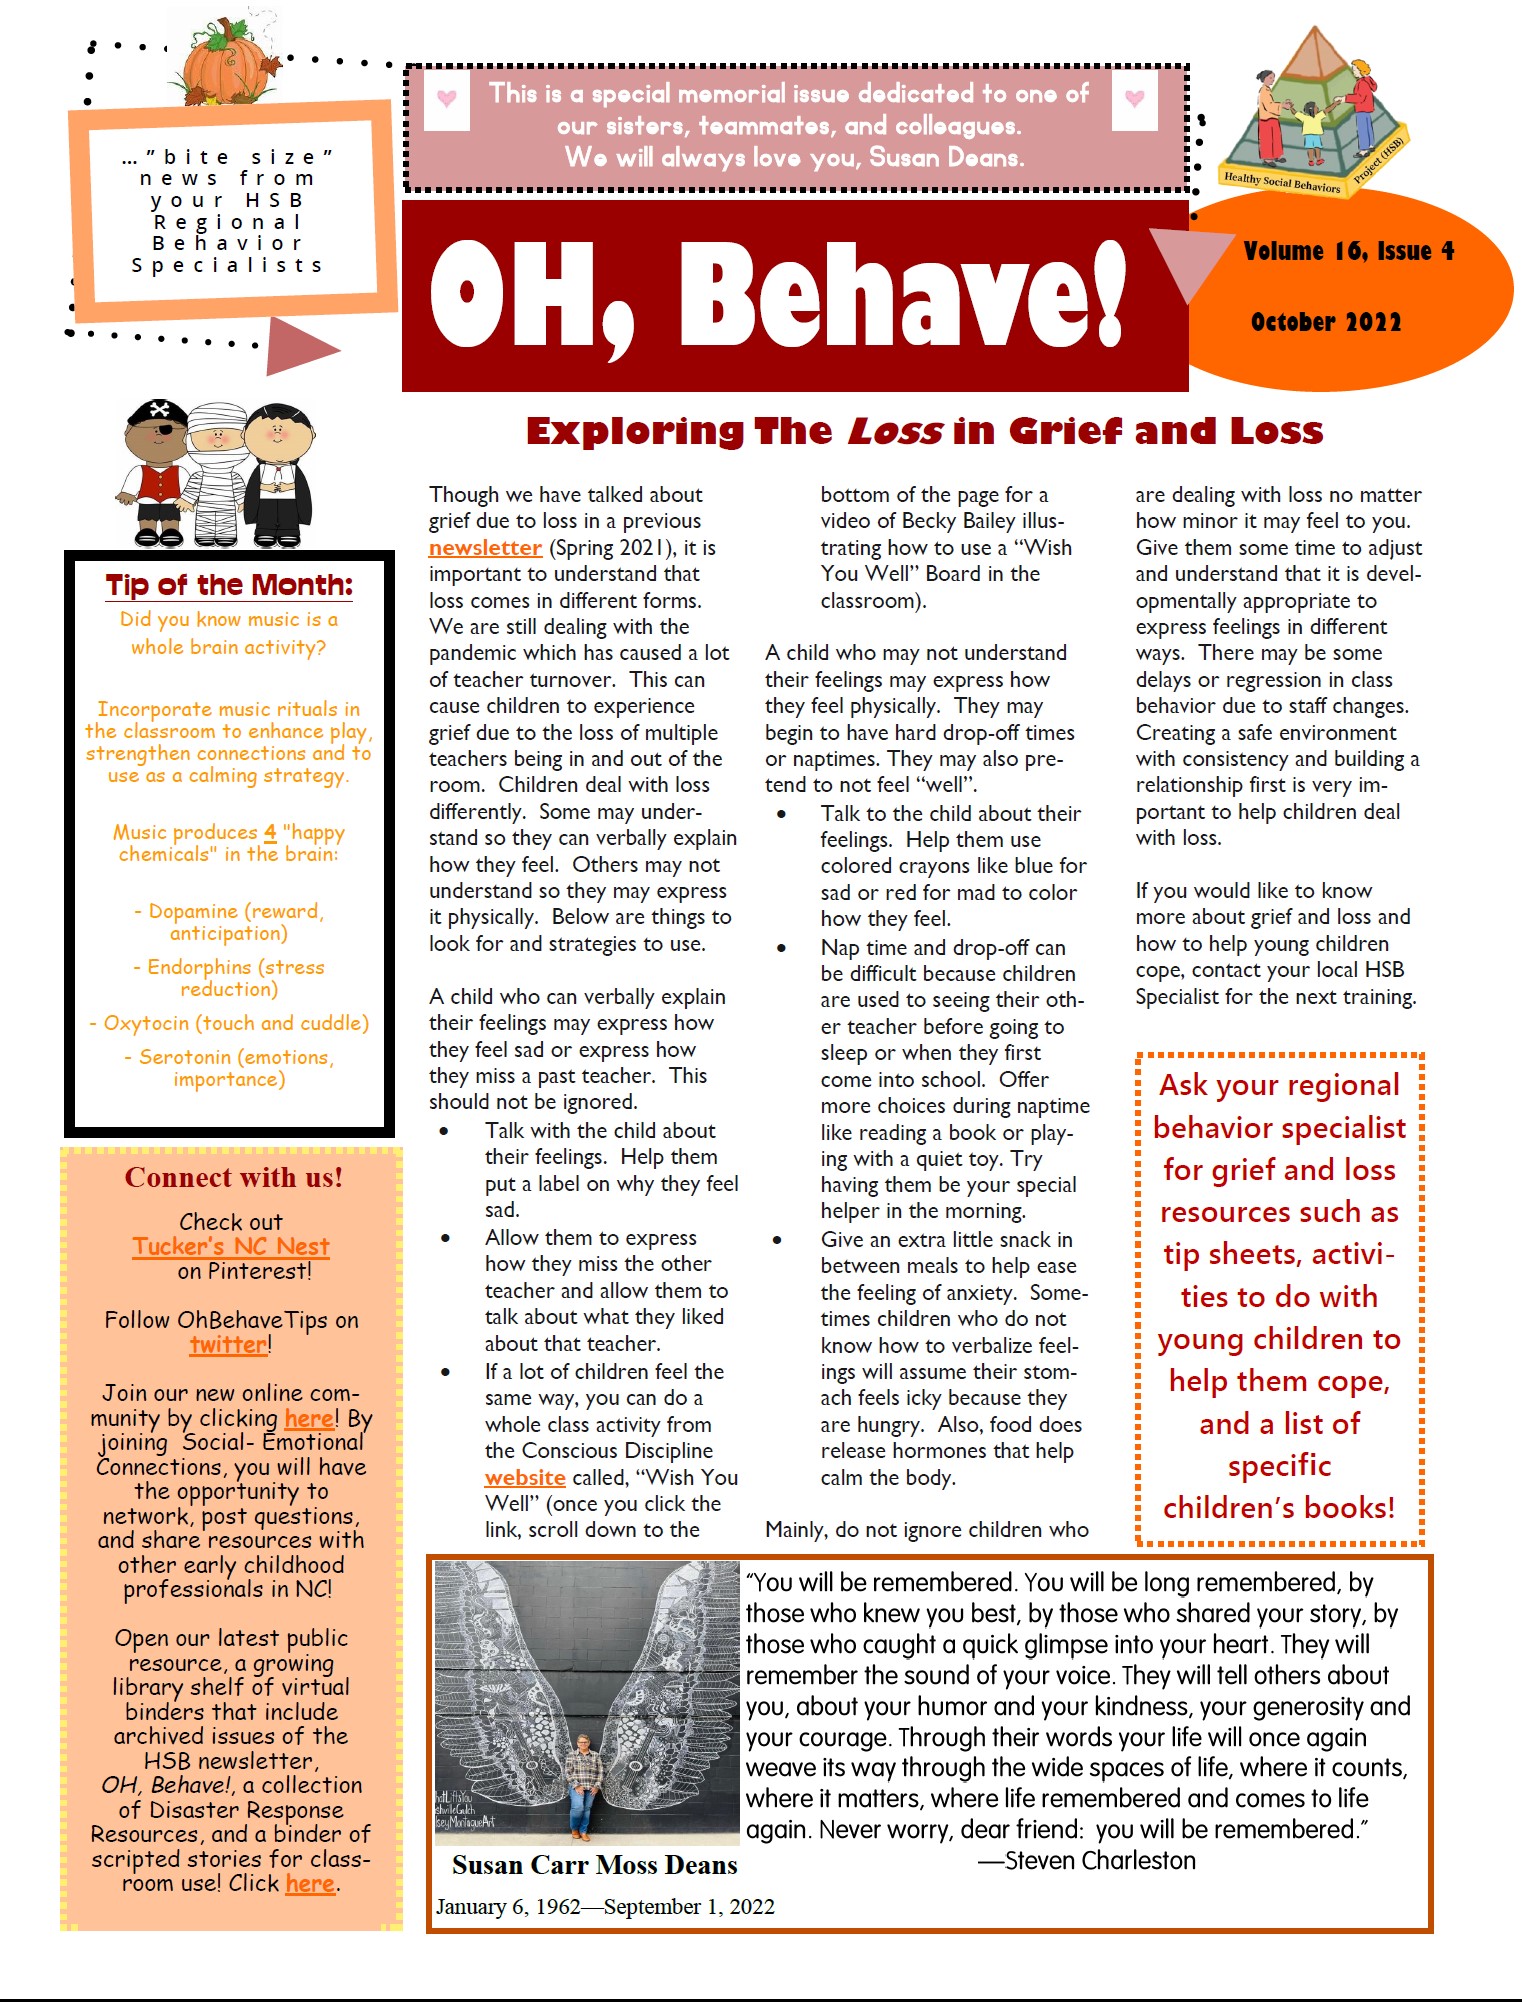 Oh Behave! newsletter of the Healthy Social Behaviors Project.